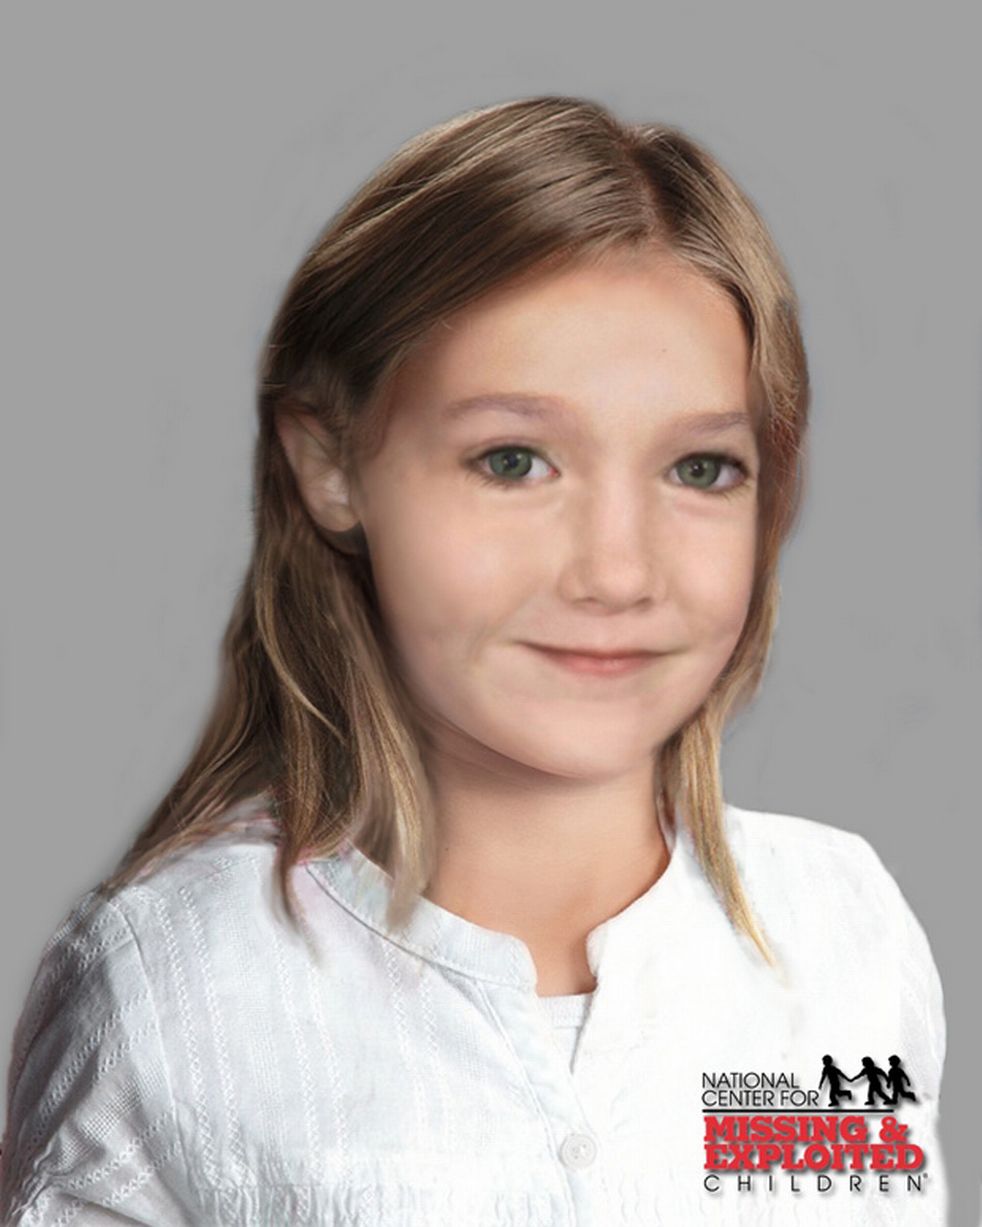 3rd November 2009: Two years on from Madeleine's abduction, a new age-progressed picture is released showing how she may looked aged 7.